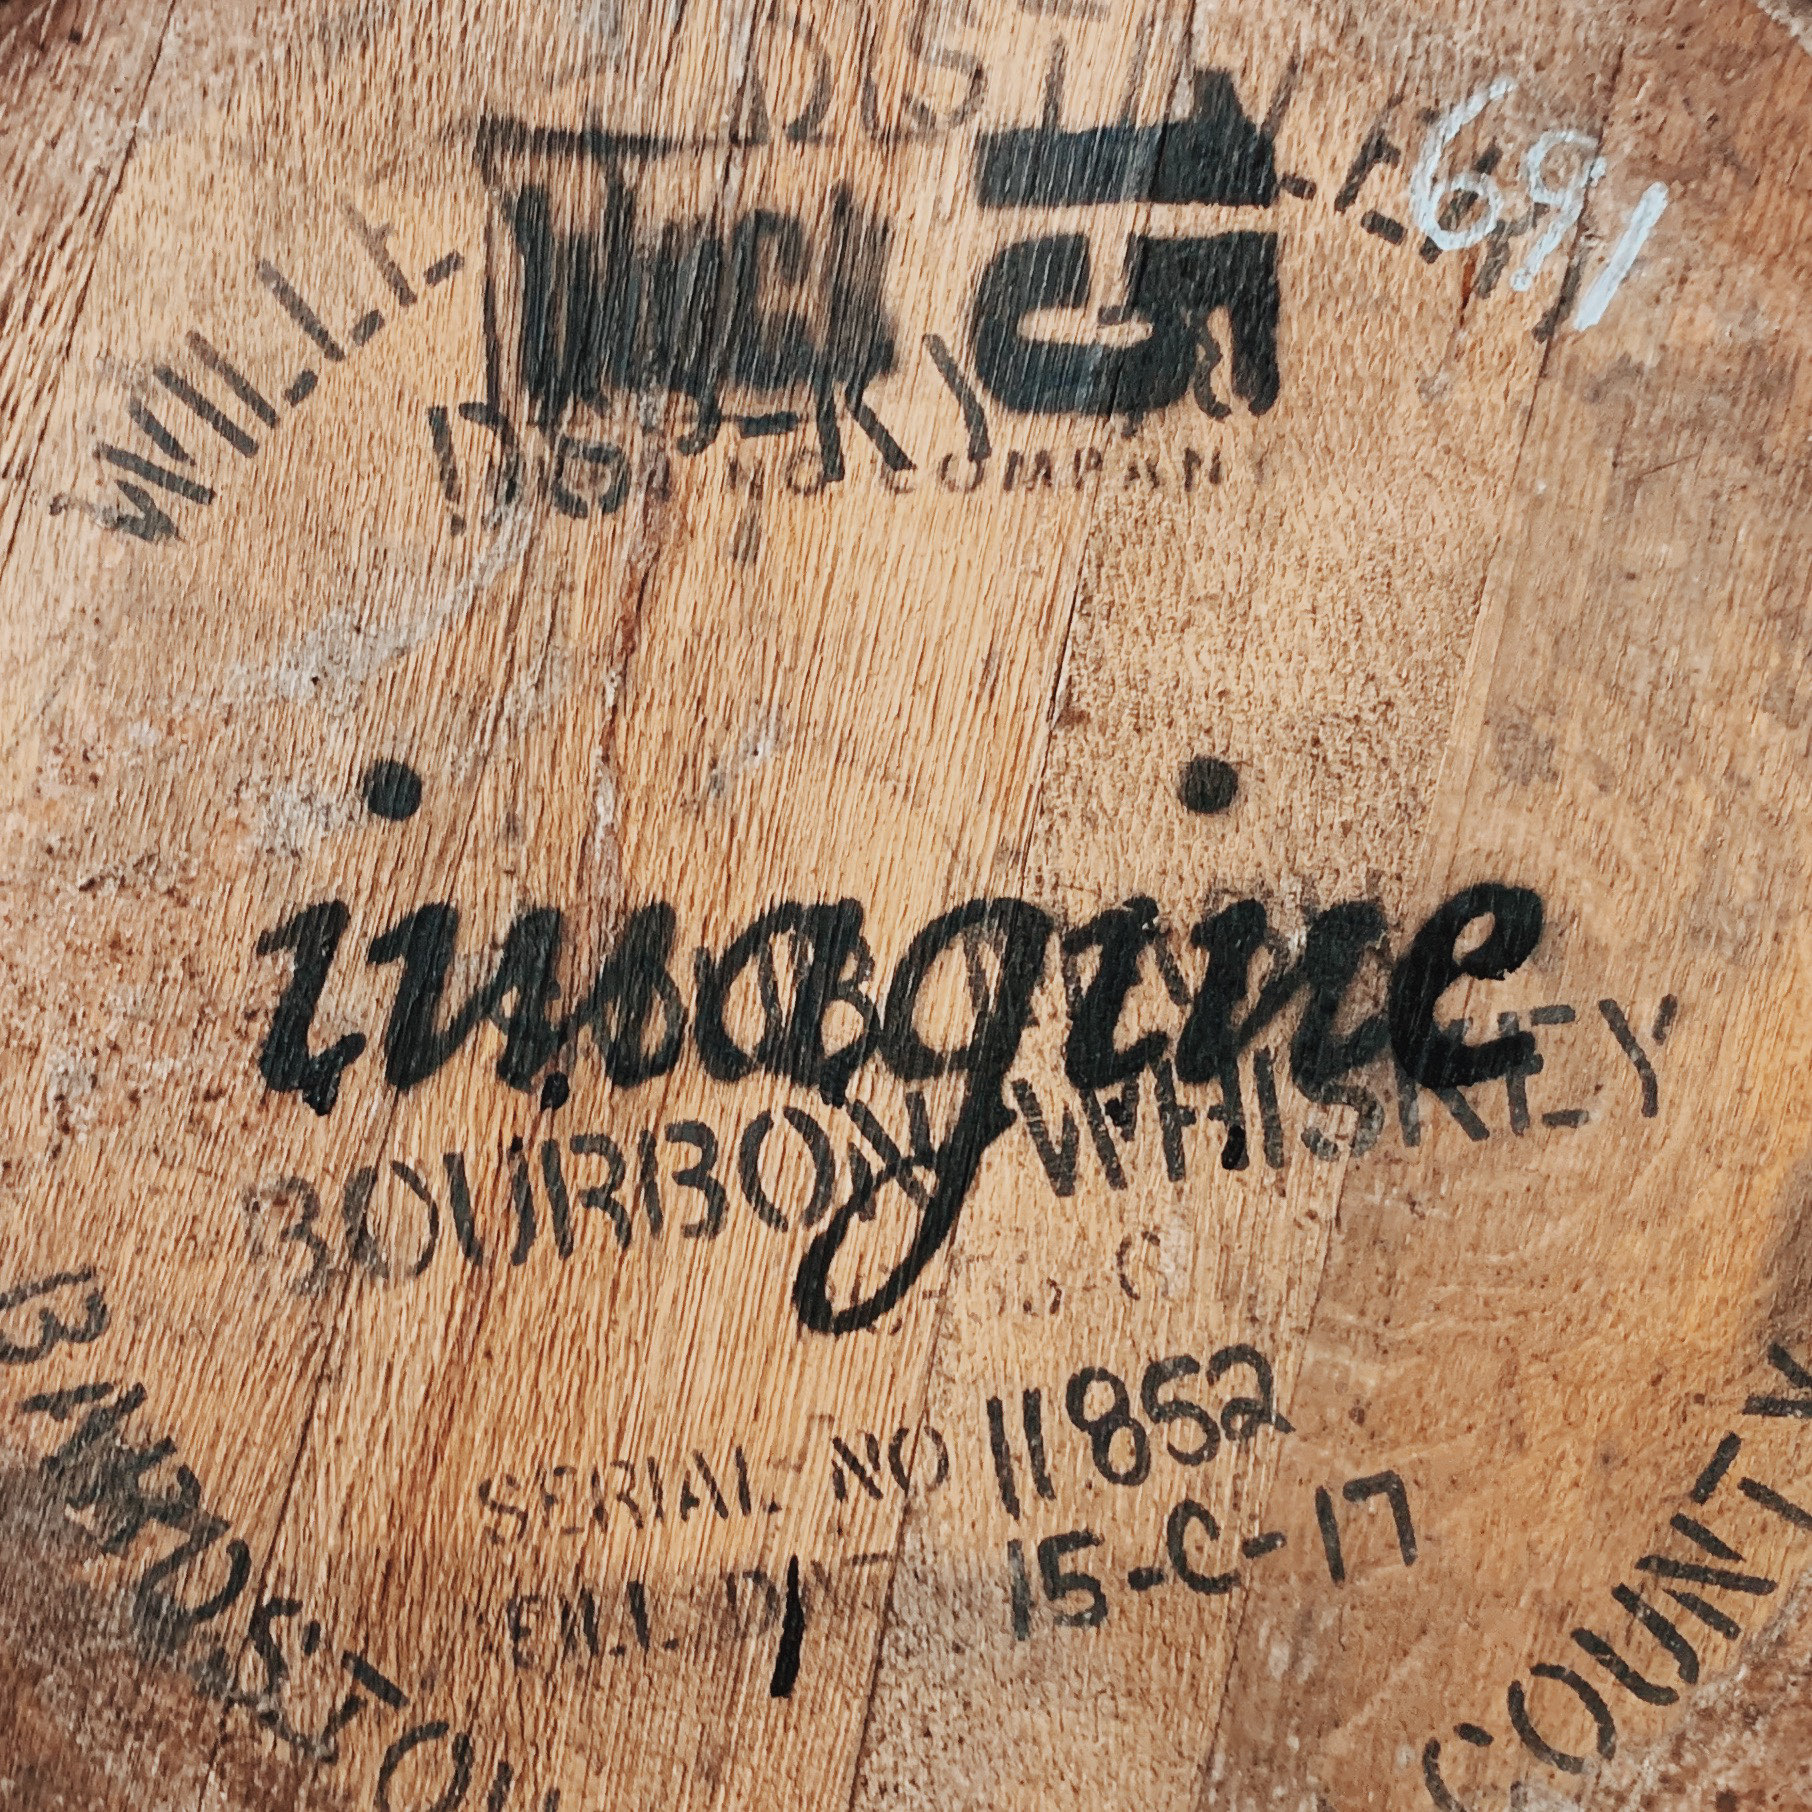 Whiskey barrel top with various markings